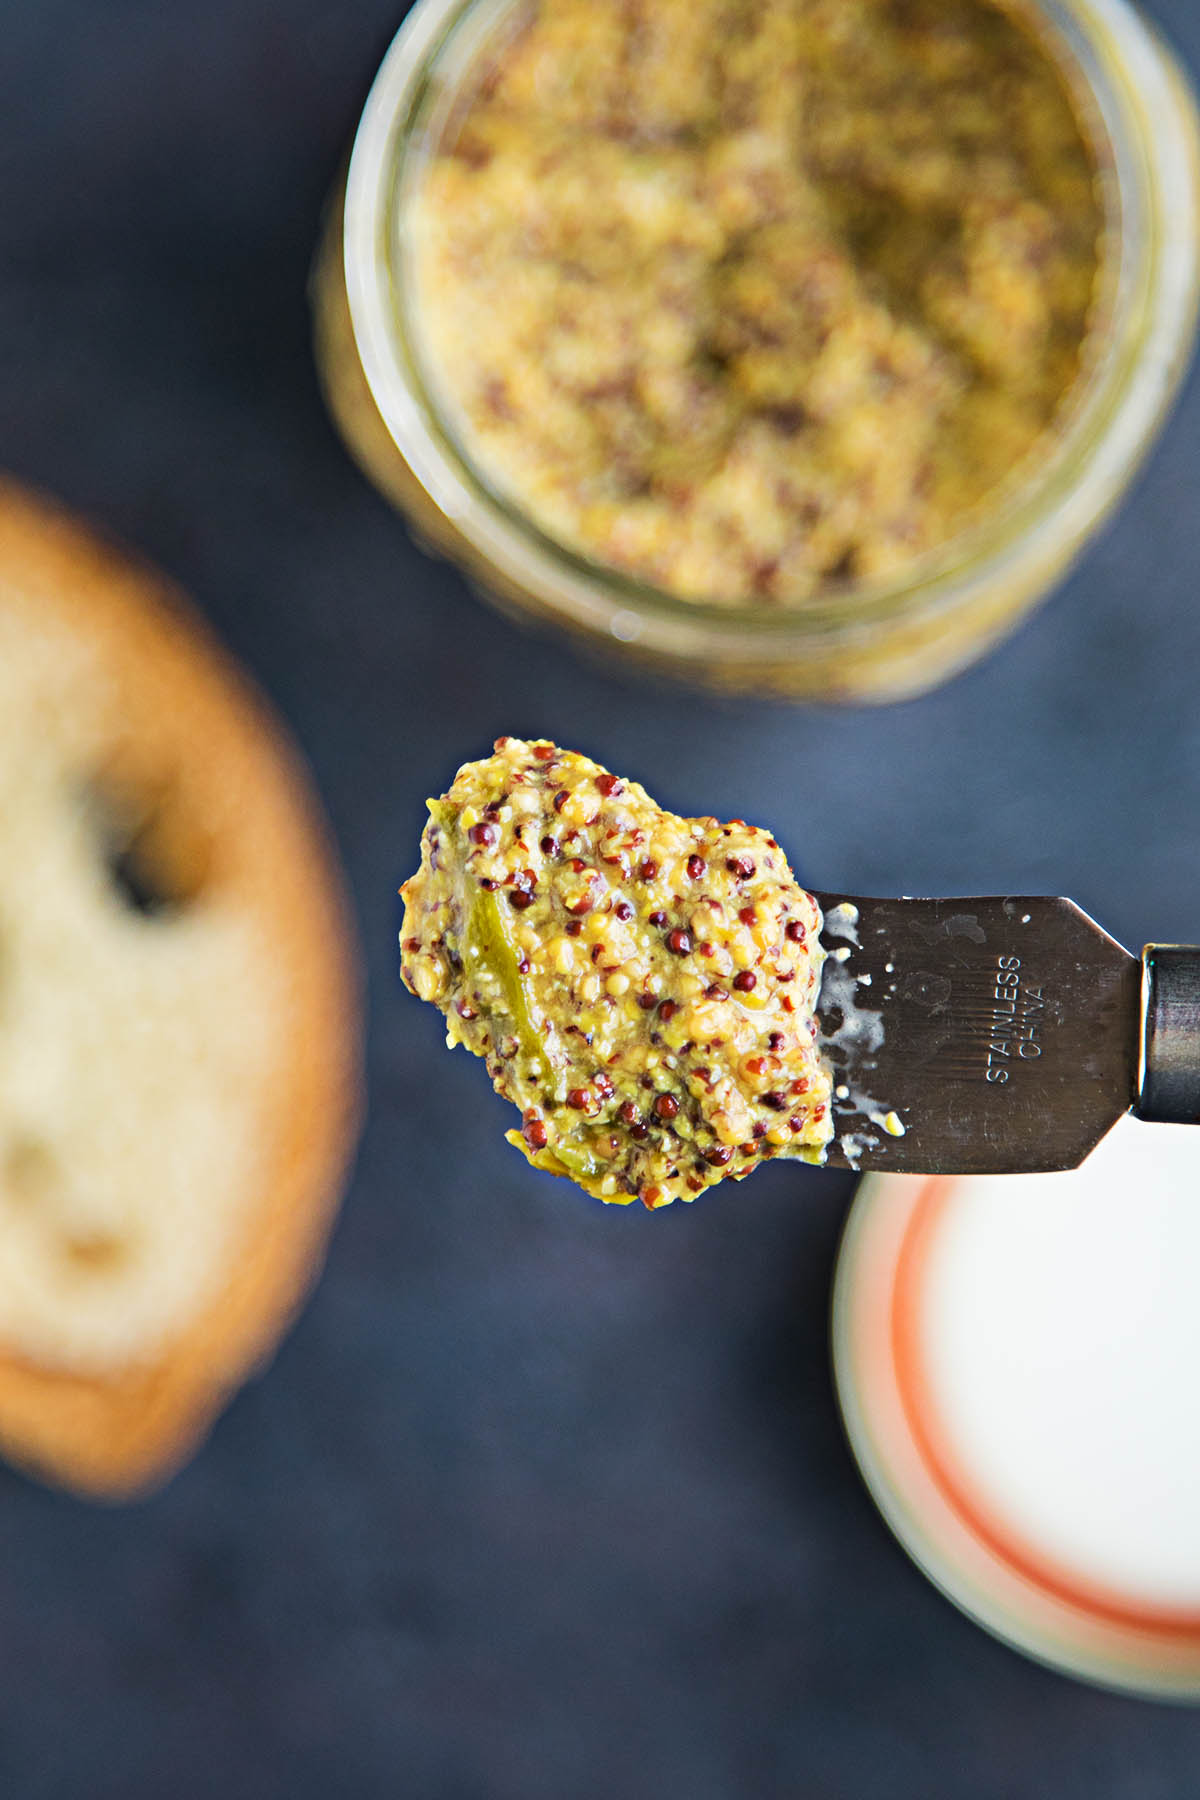 A spoonful of the delicious Roasted Hatch Chile-Beer Mustard